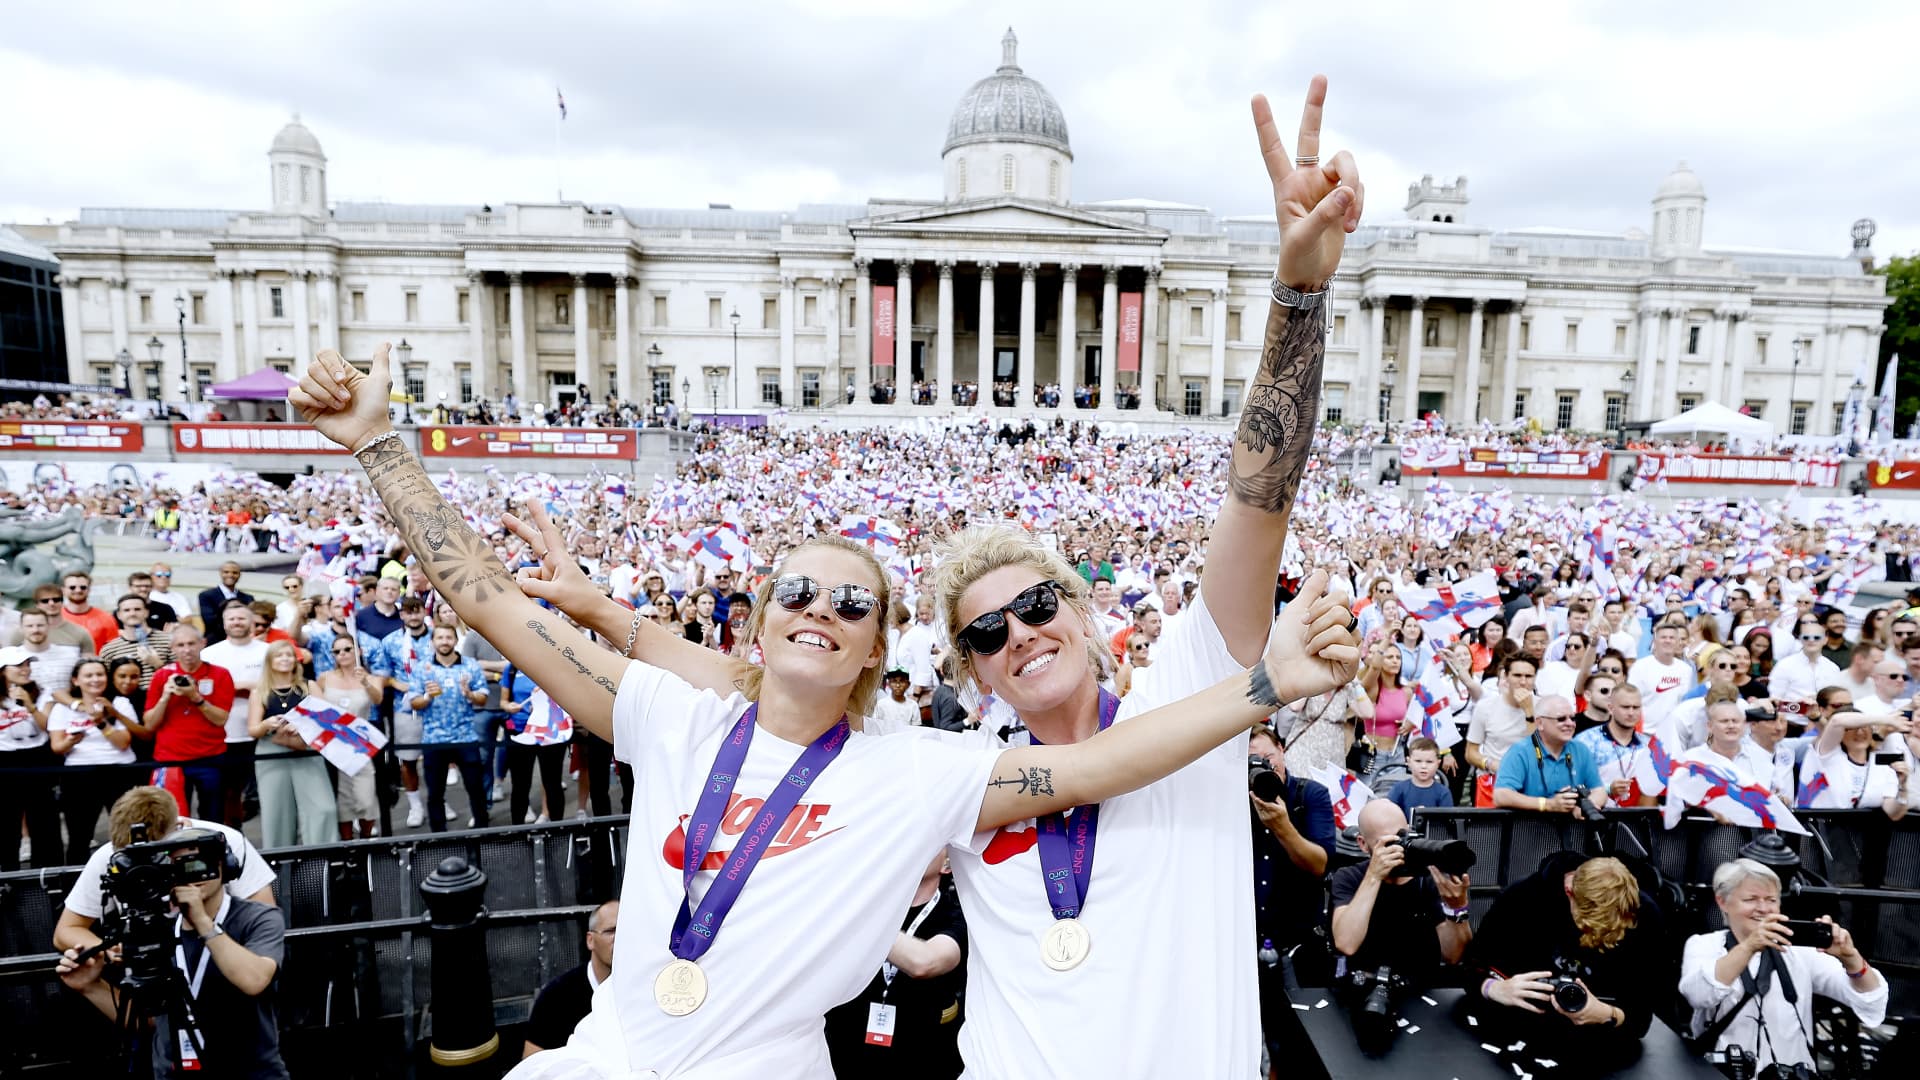 Rachel Daly and Millie Bright of England celebrate during the England Women's Team Celebration at Trafalgar Square on Aug. 1, 2022 in London.